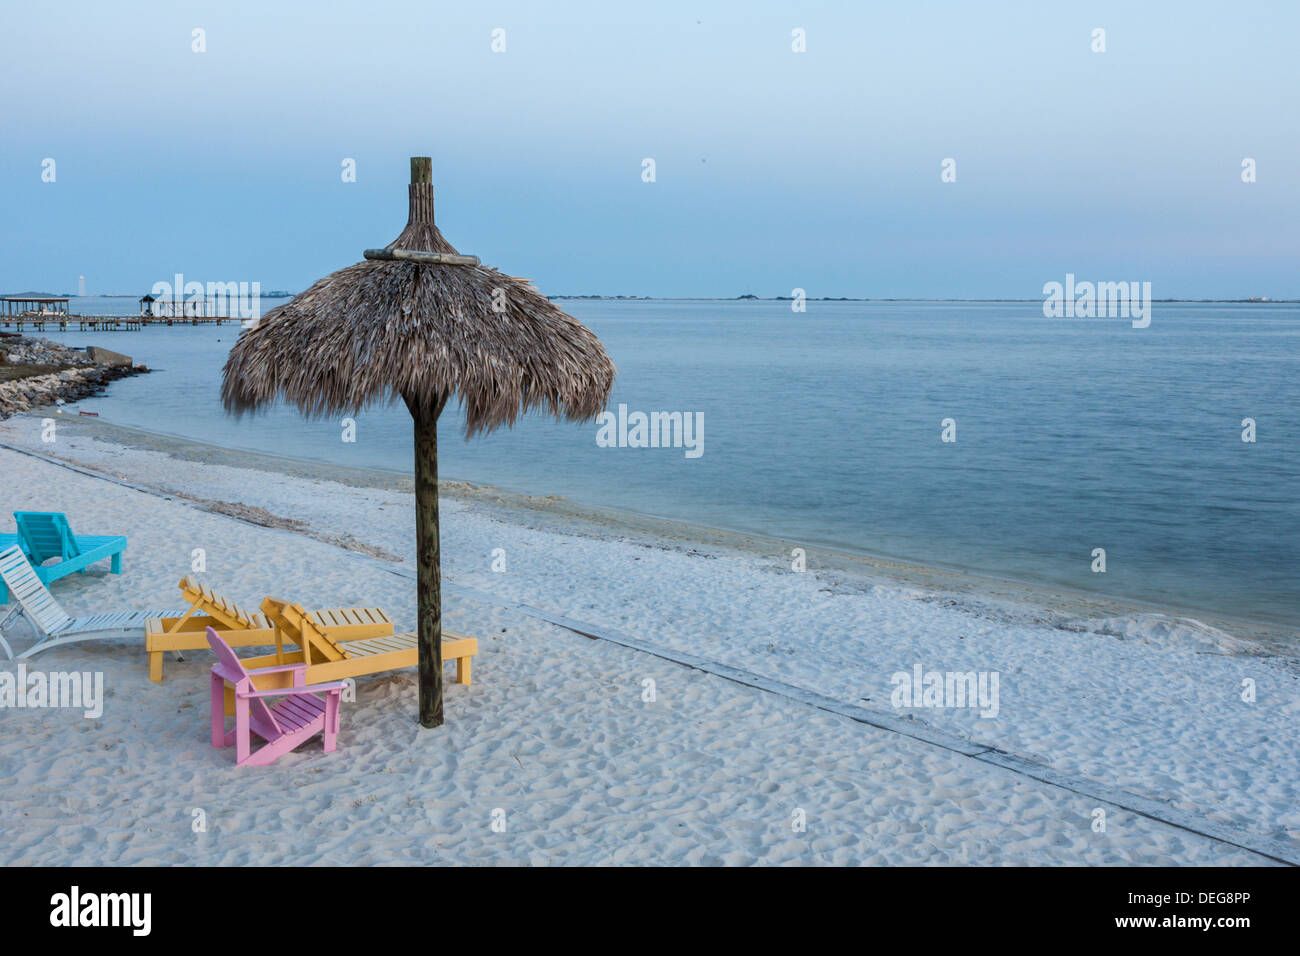 Brightly painted wooden beach chairs on the white sand beach of Santa Rosa Sound in Navarre, Florida Stock Photo